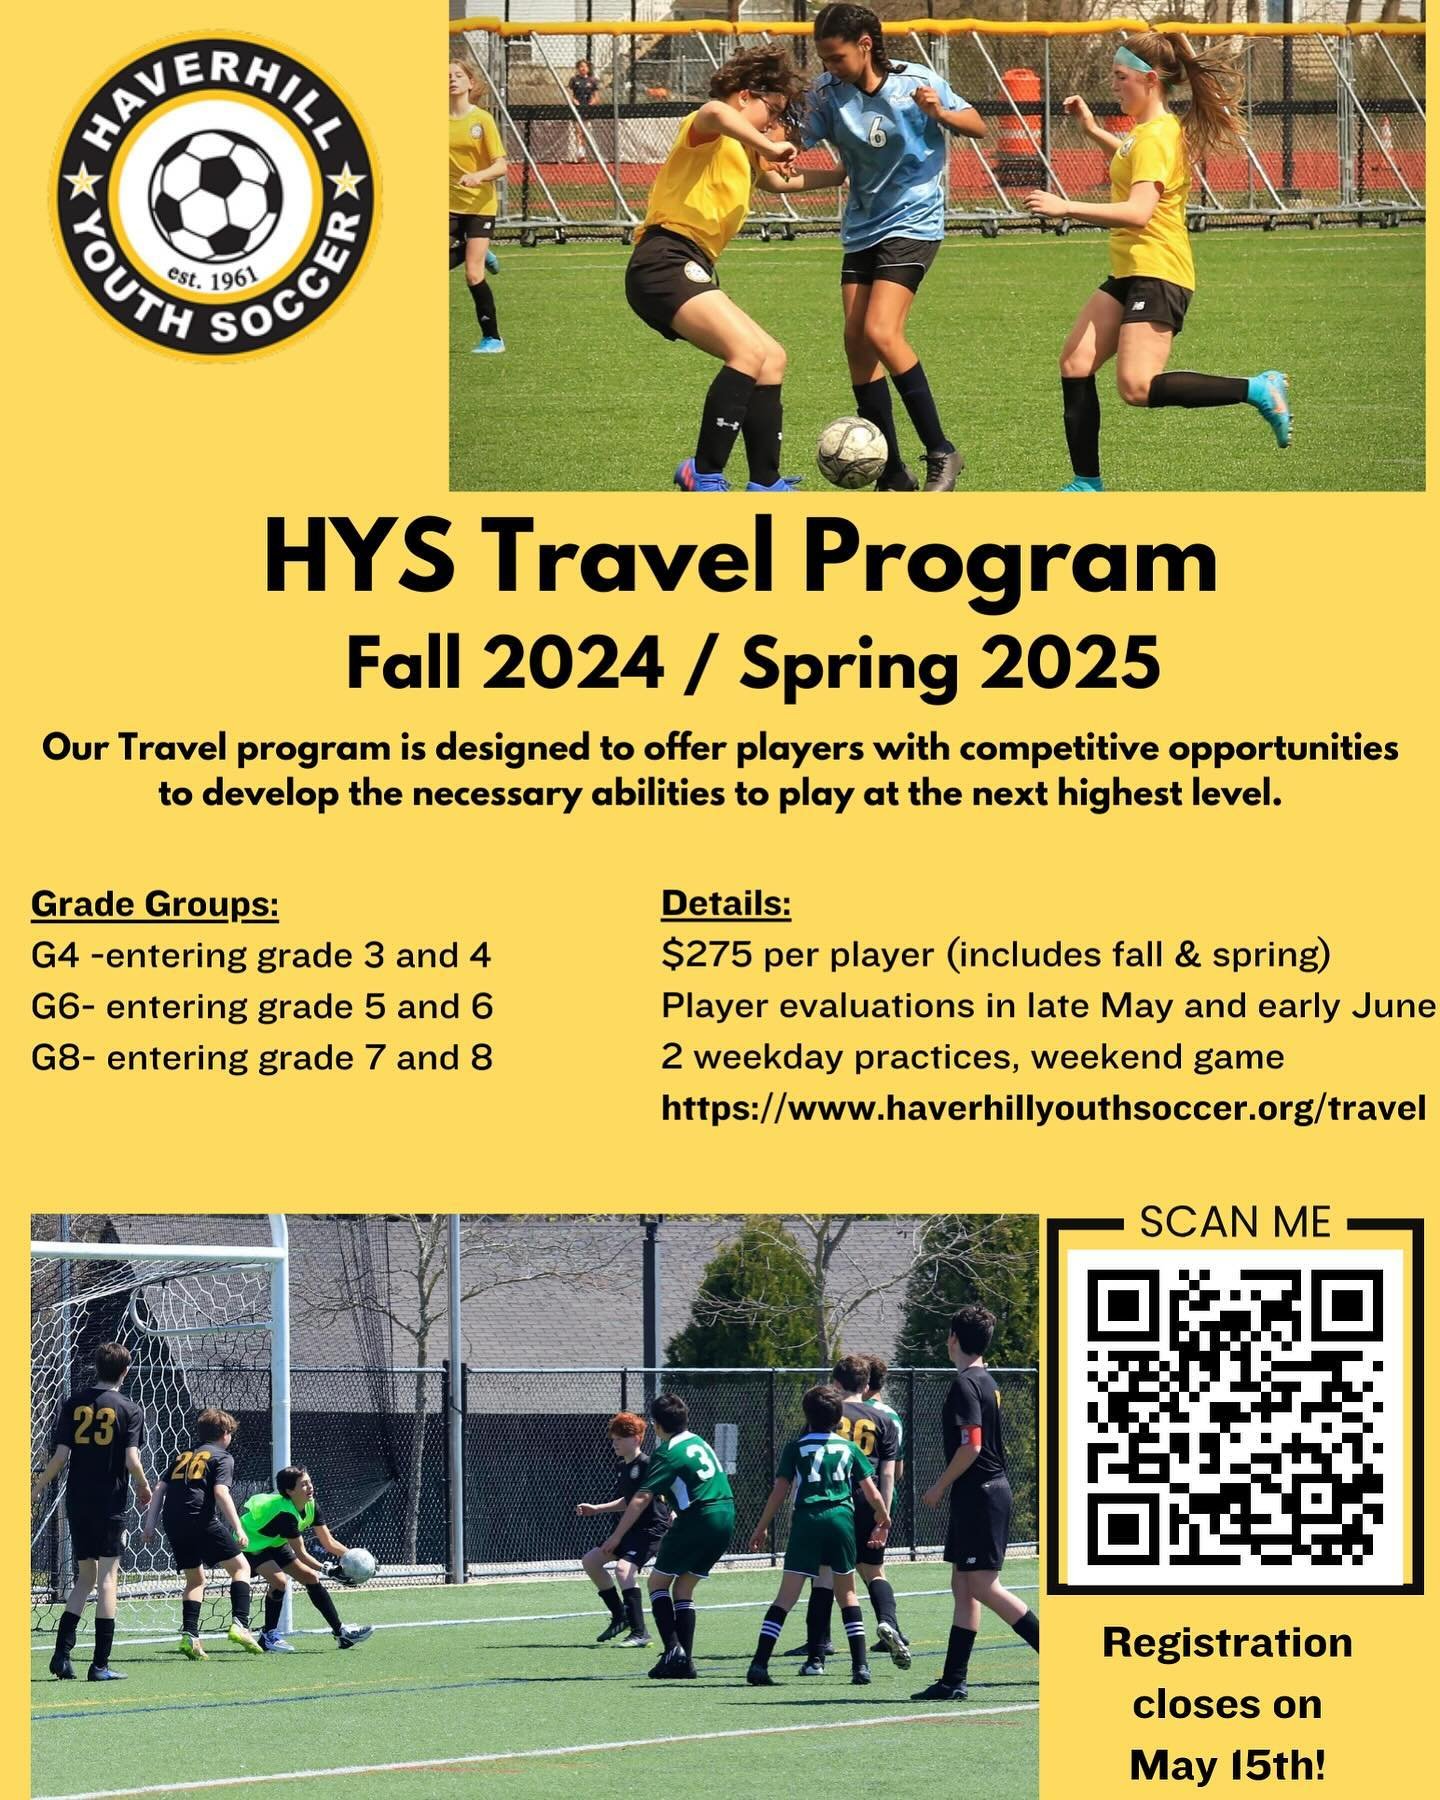 TRAVEL registration is open for the 24-25 season! 
Fall 2024 entering grade 3 through grade 8. 
For more information visit: 
www.haverhillyouthsoccer.org/travel
Register here: https://go.teamsnap.com/forms/426432